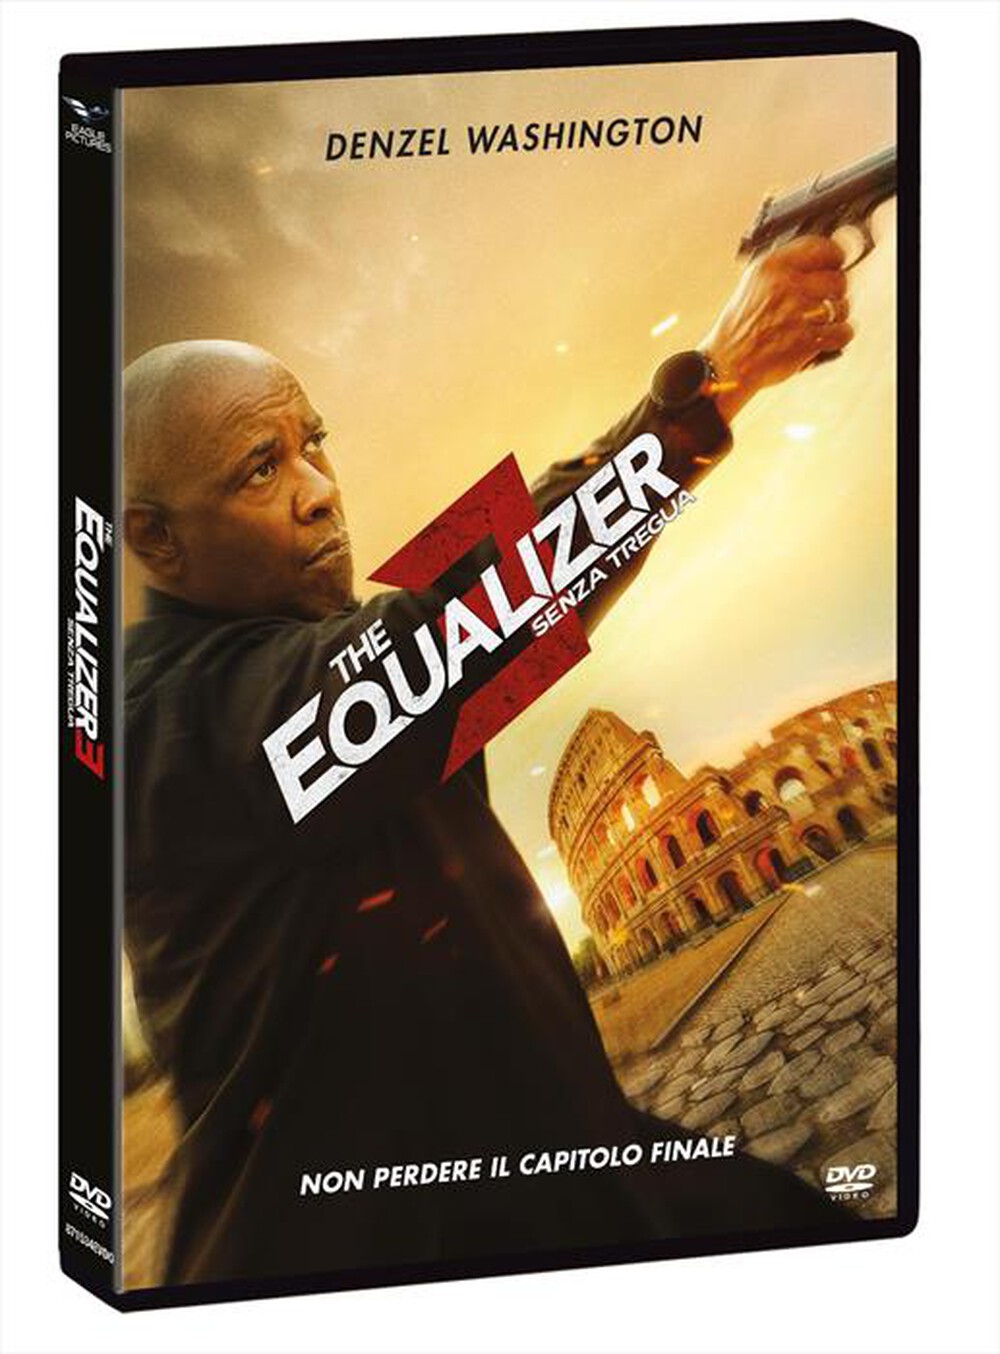 "SONY PICTURES - Equalizer 3 (The) - Senza Tregua"